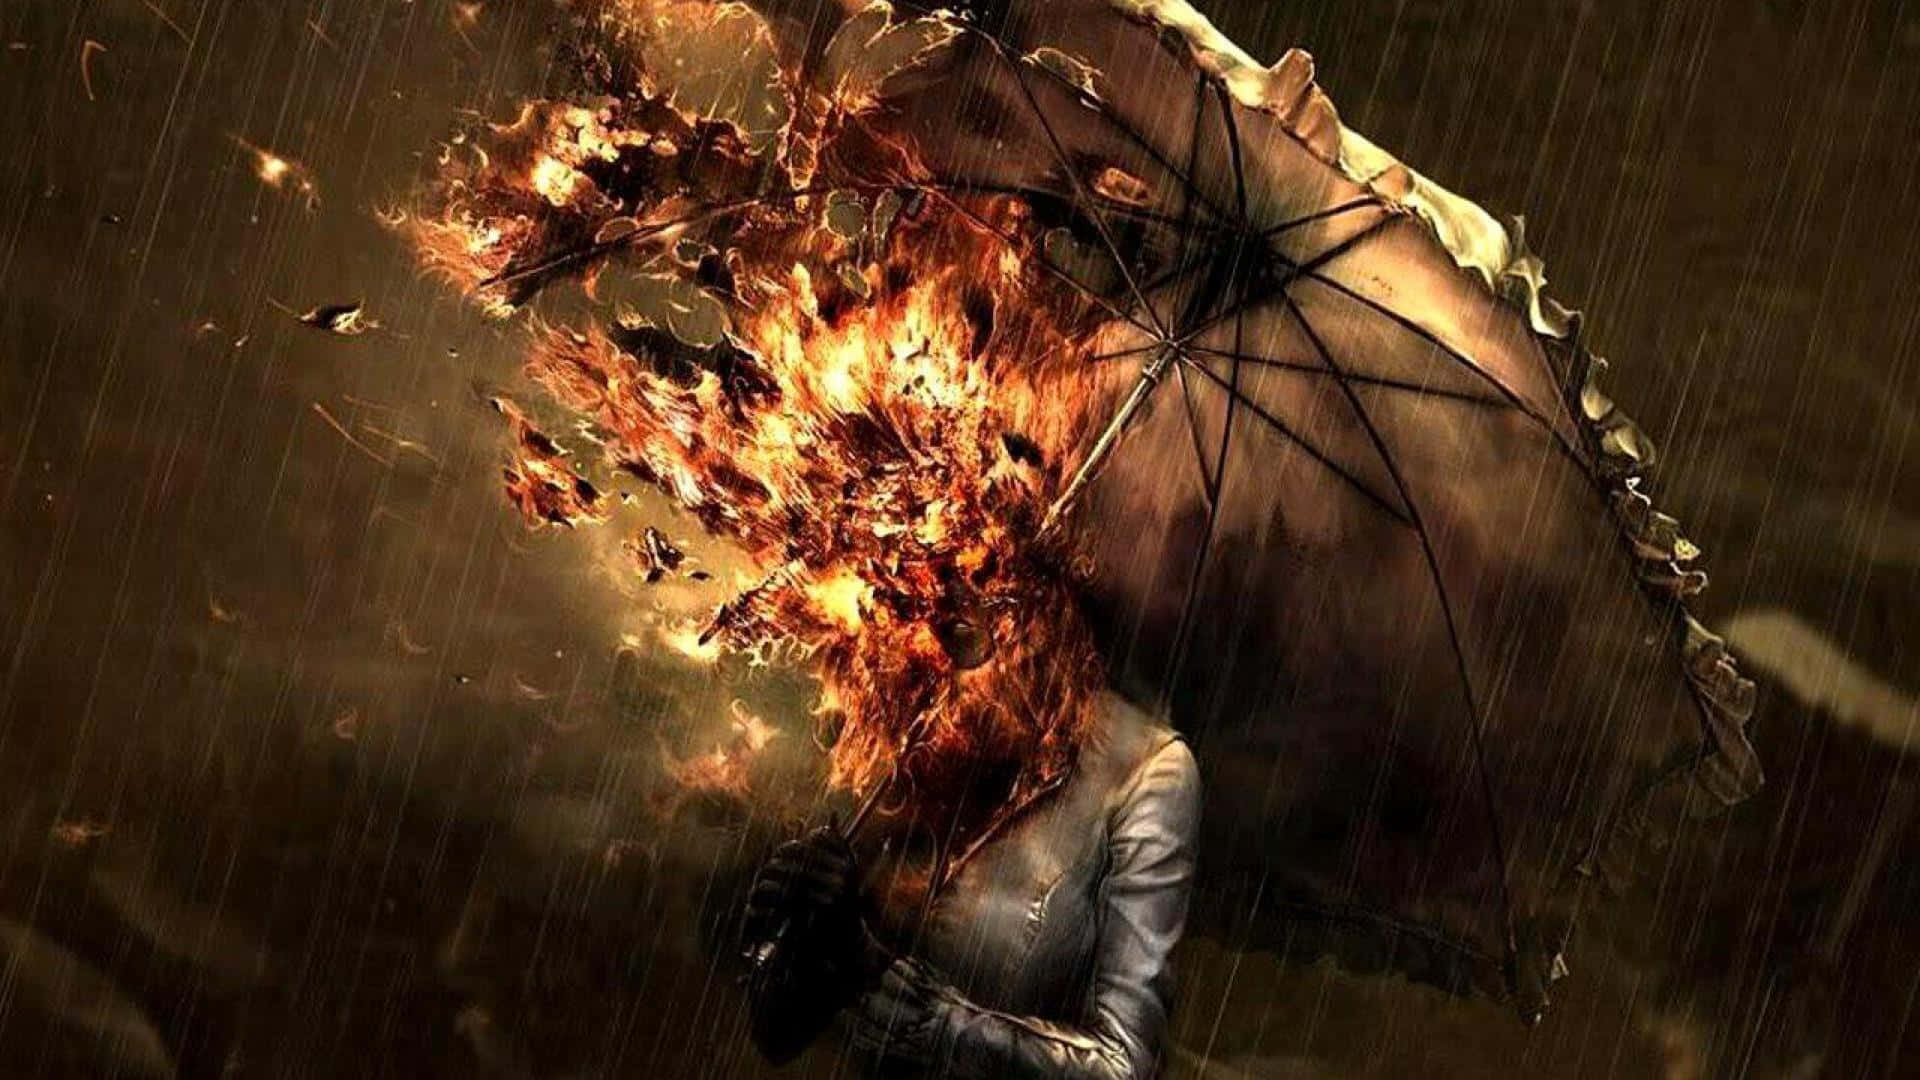 Weird Woman With Burning Umbrella During Rain Picture